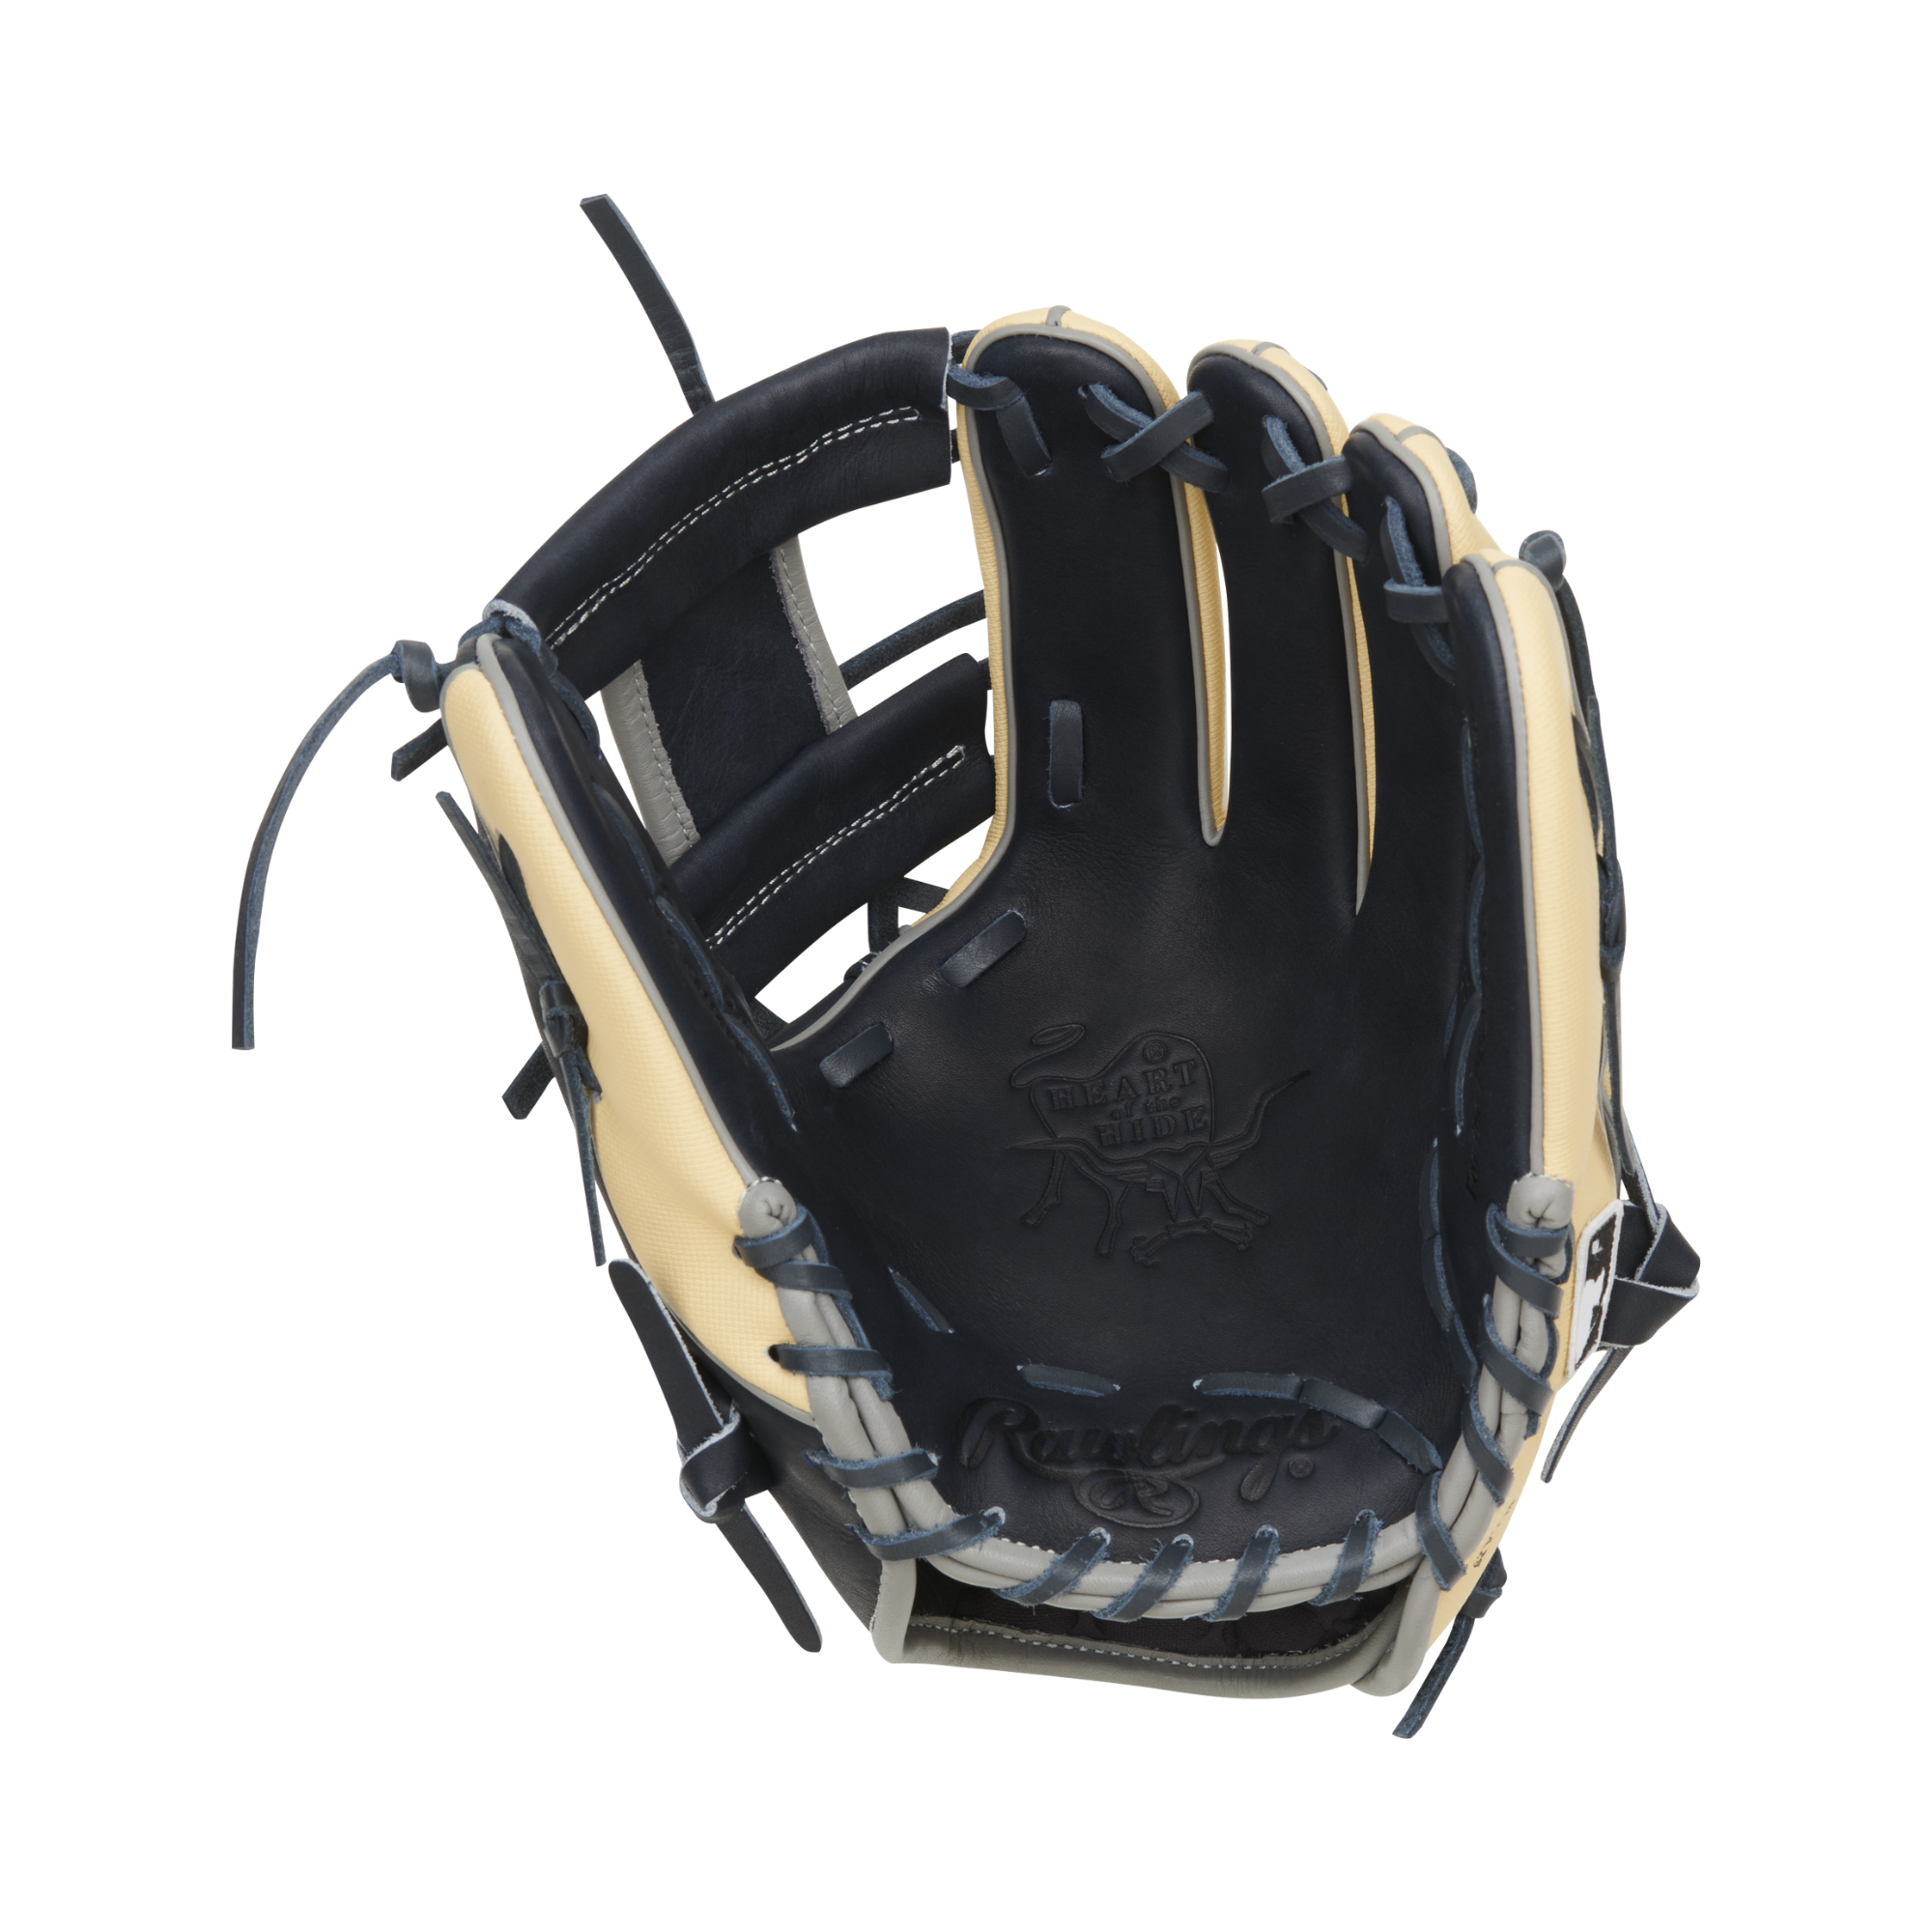 Rawlings Heart Of the Hide Color Sync 8.0 Baseball Glove PRO204W-2XNSS 11.5" RHT